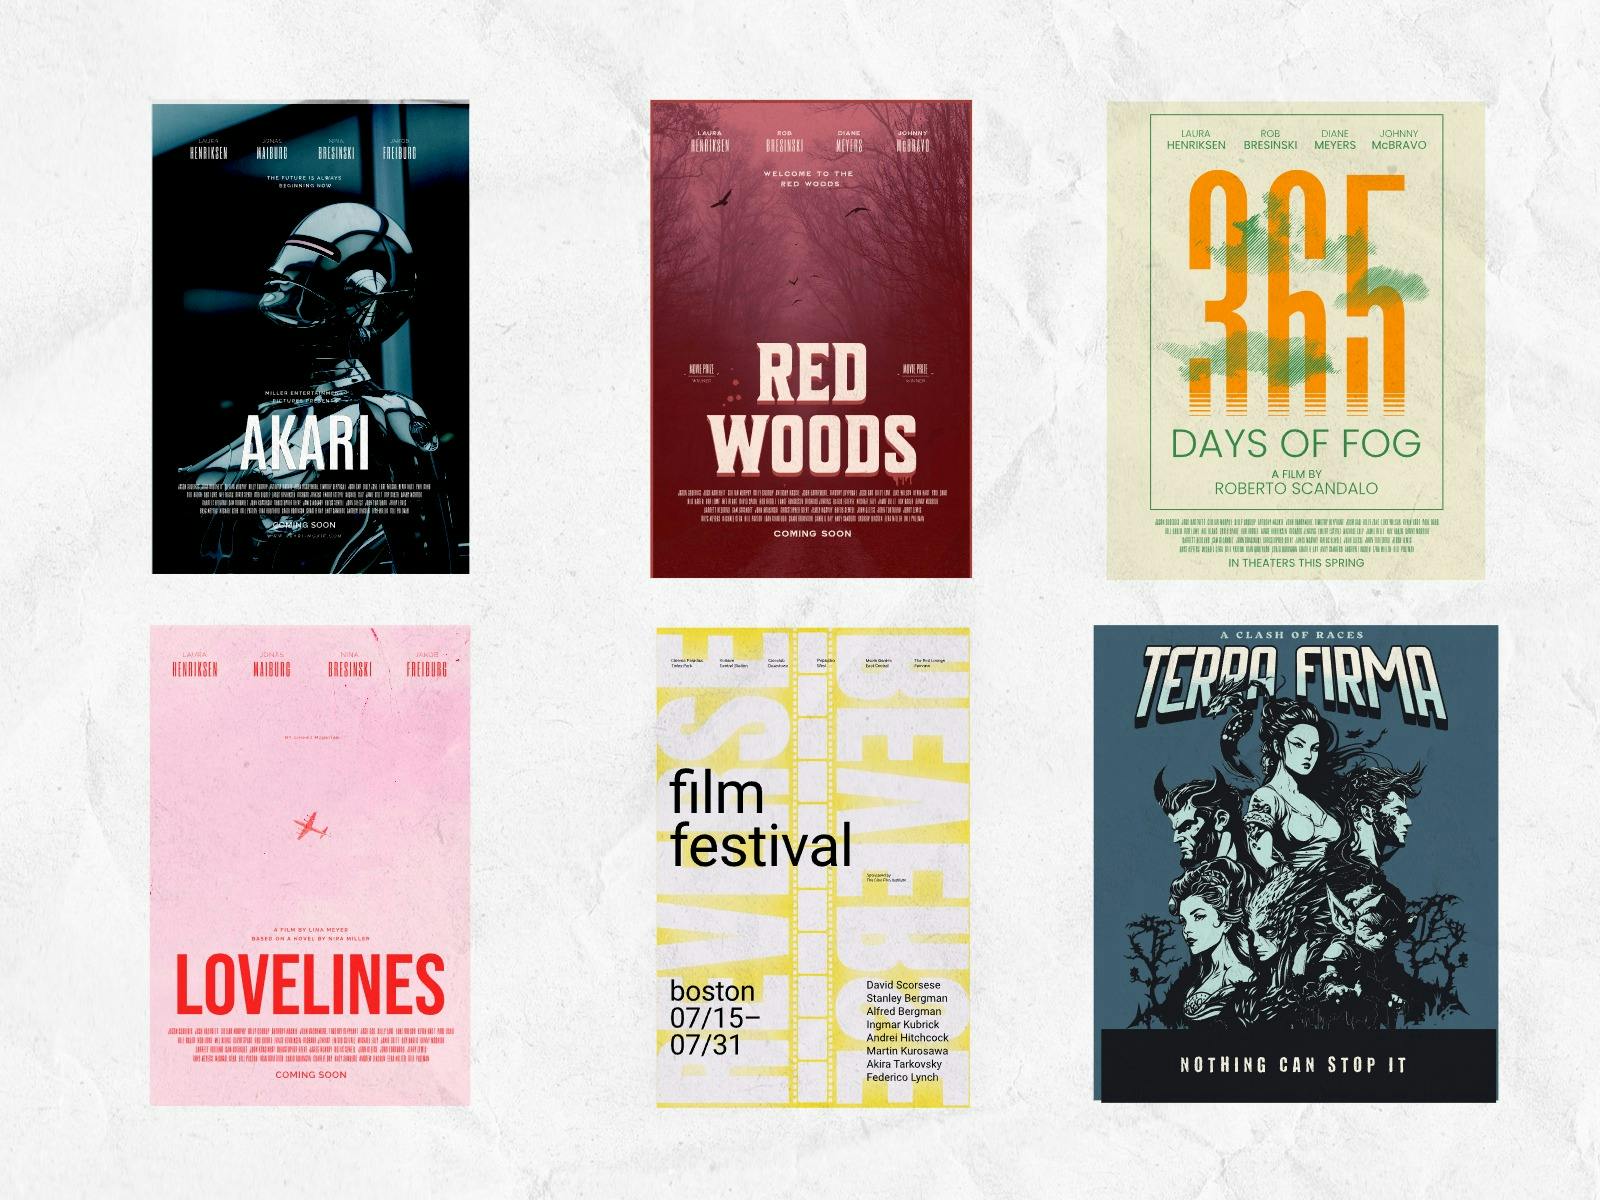 Explore the most popular movie posters in Kittl and bring your favorite films to life!